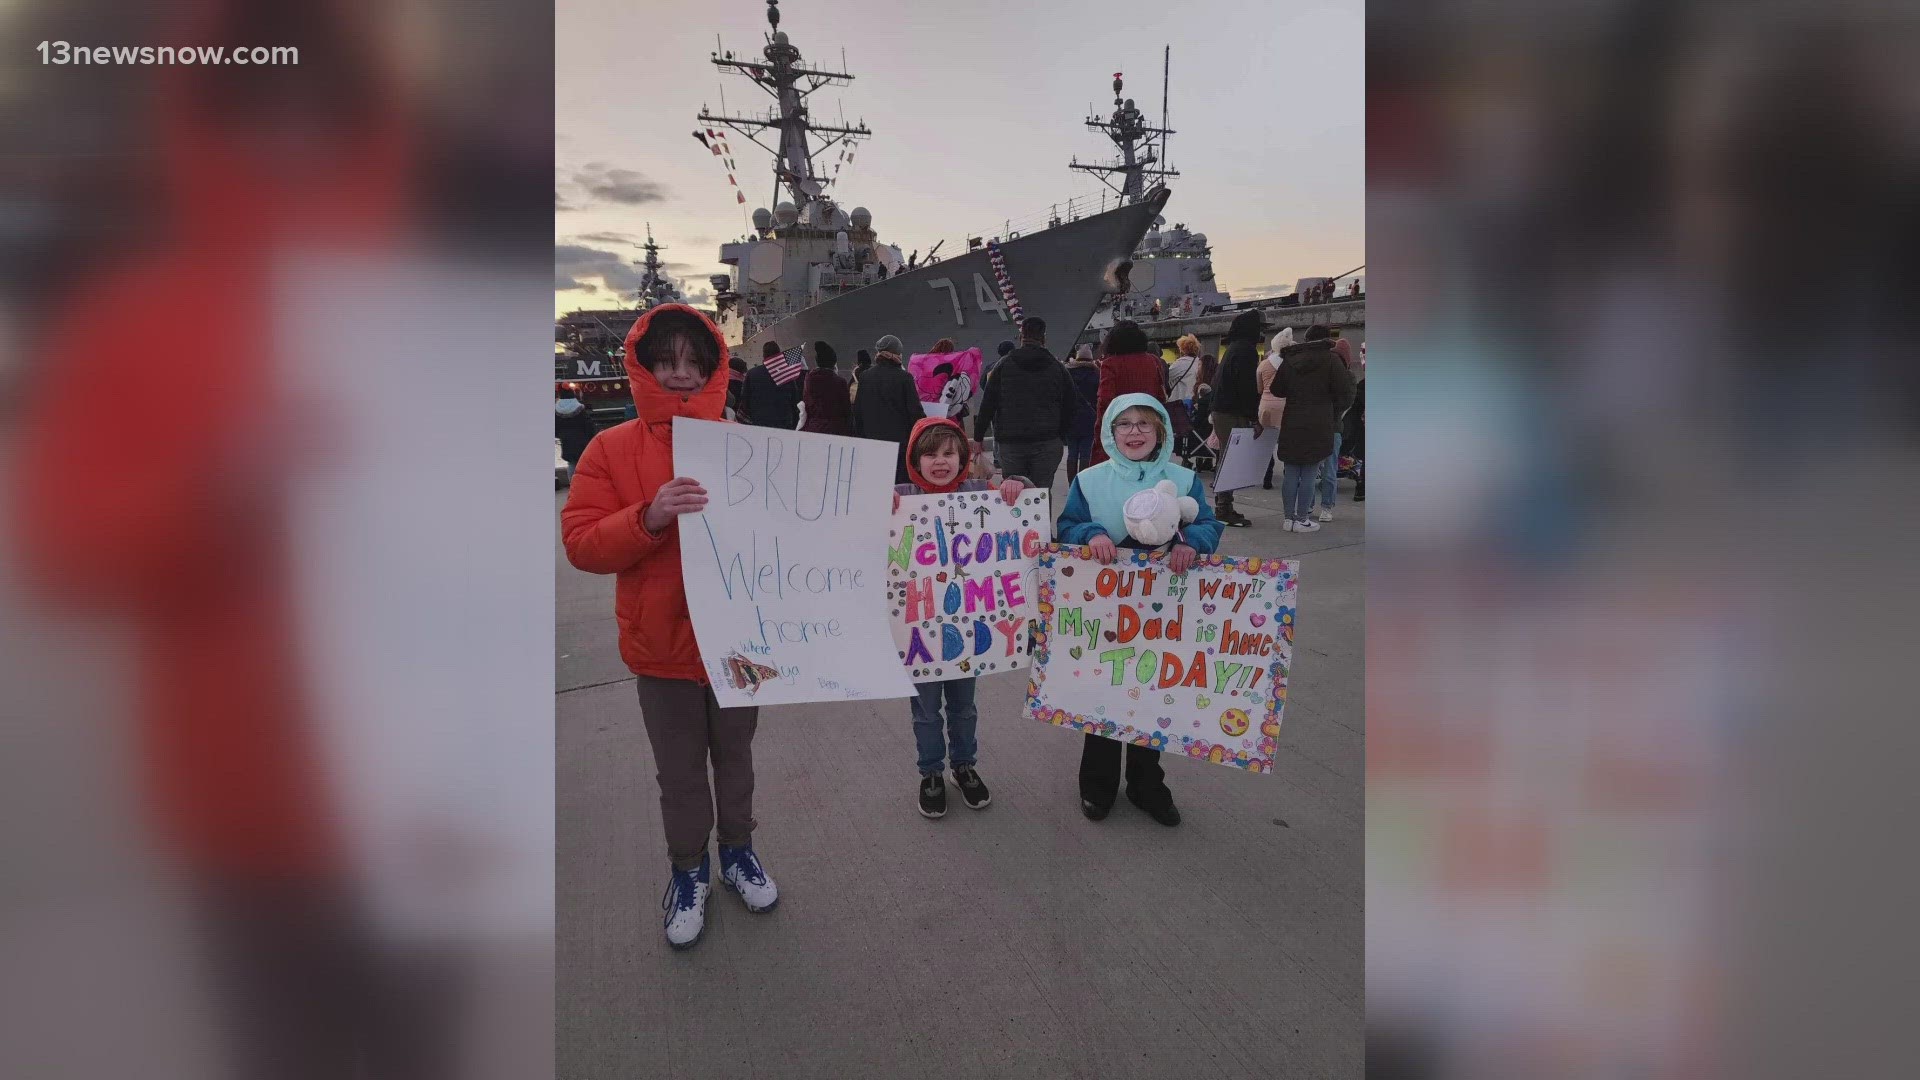 After more than eight months away, the USS Gerald R. Ford Carrier Strike Group is coming home.